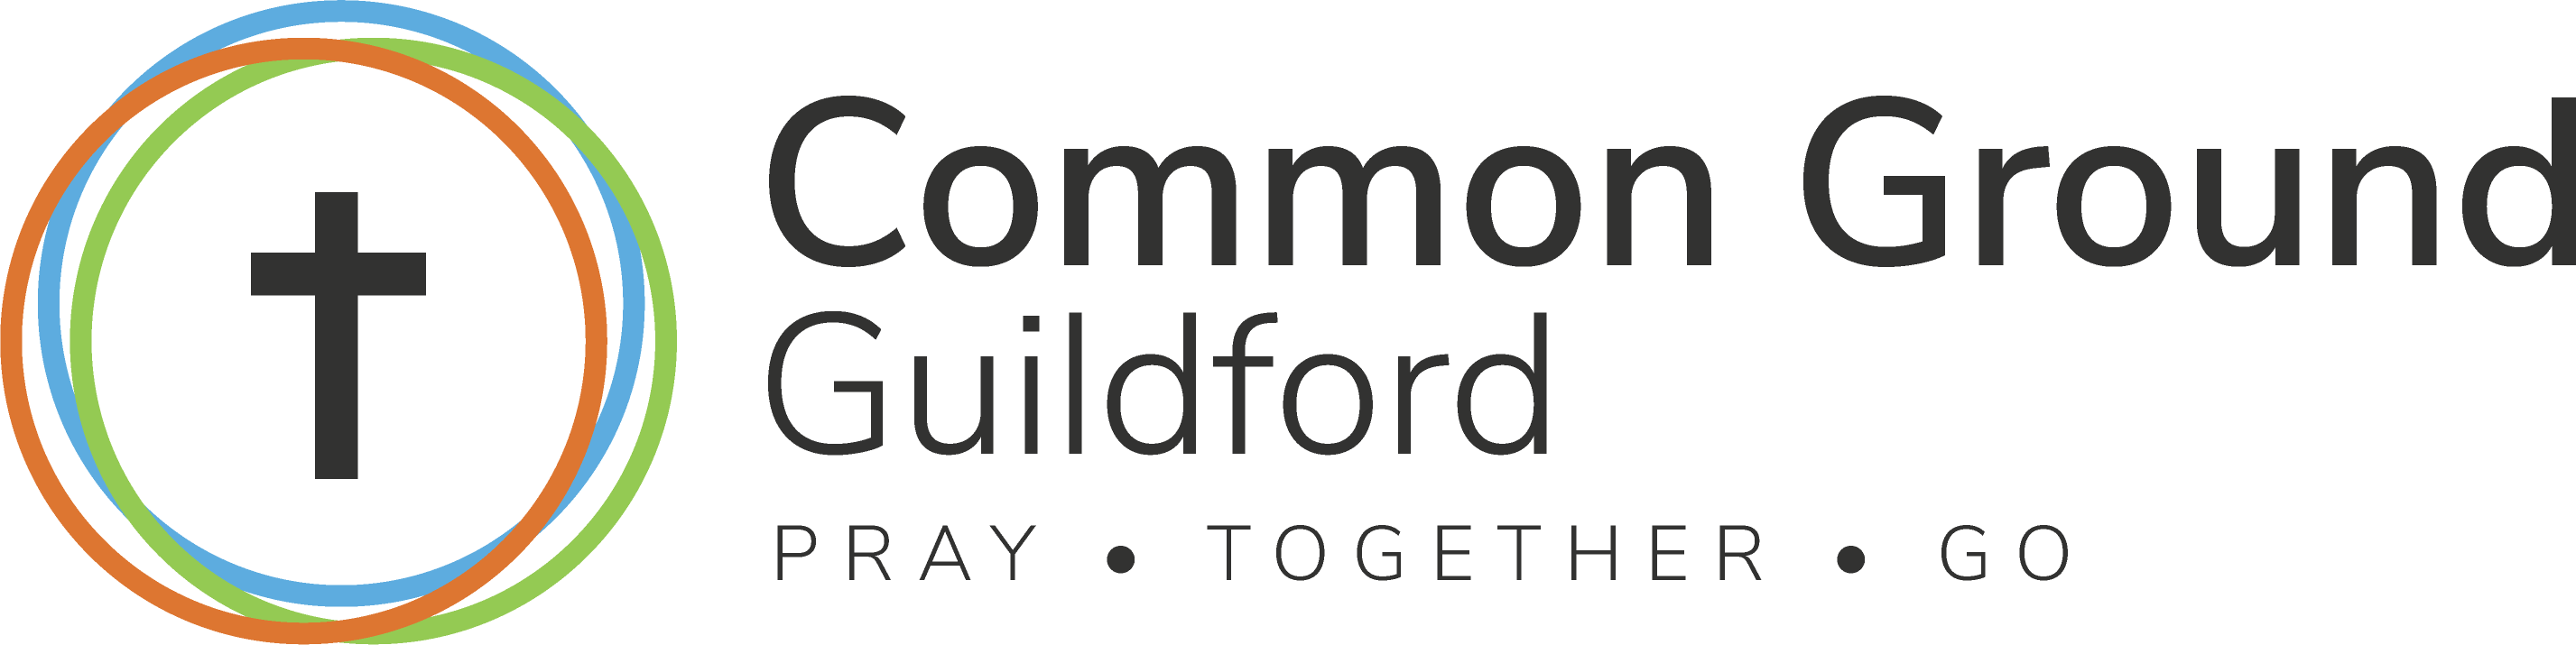 Common Ground Guildford